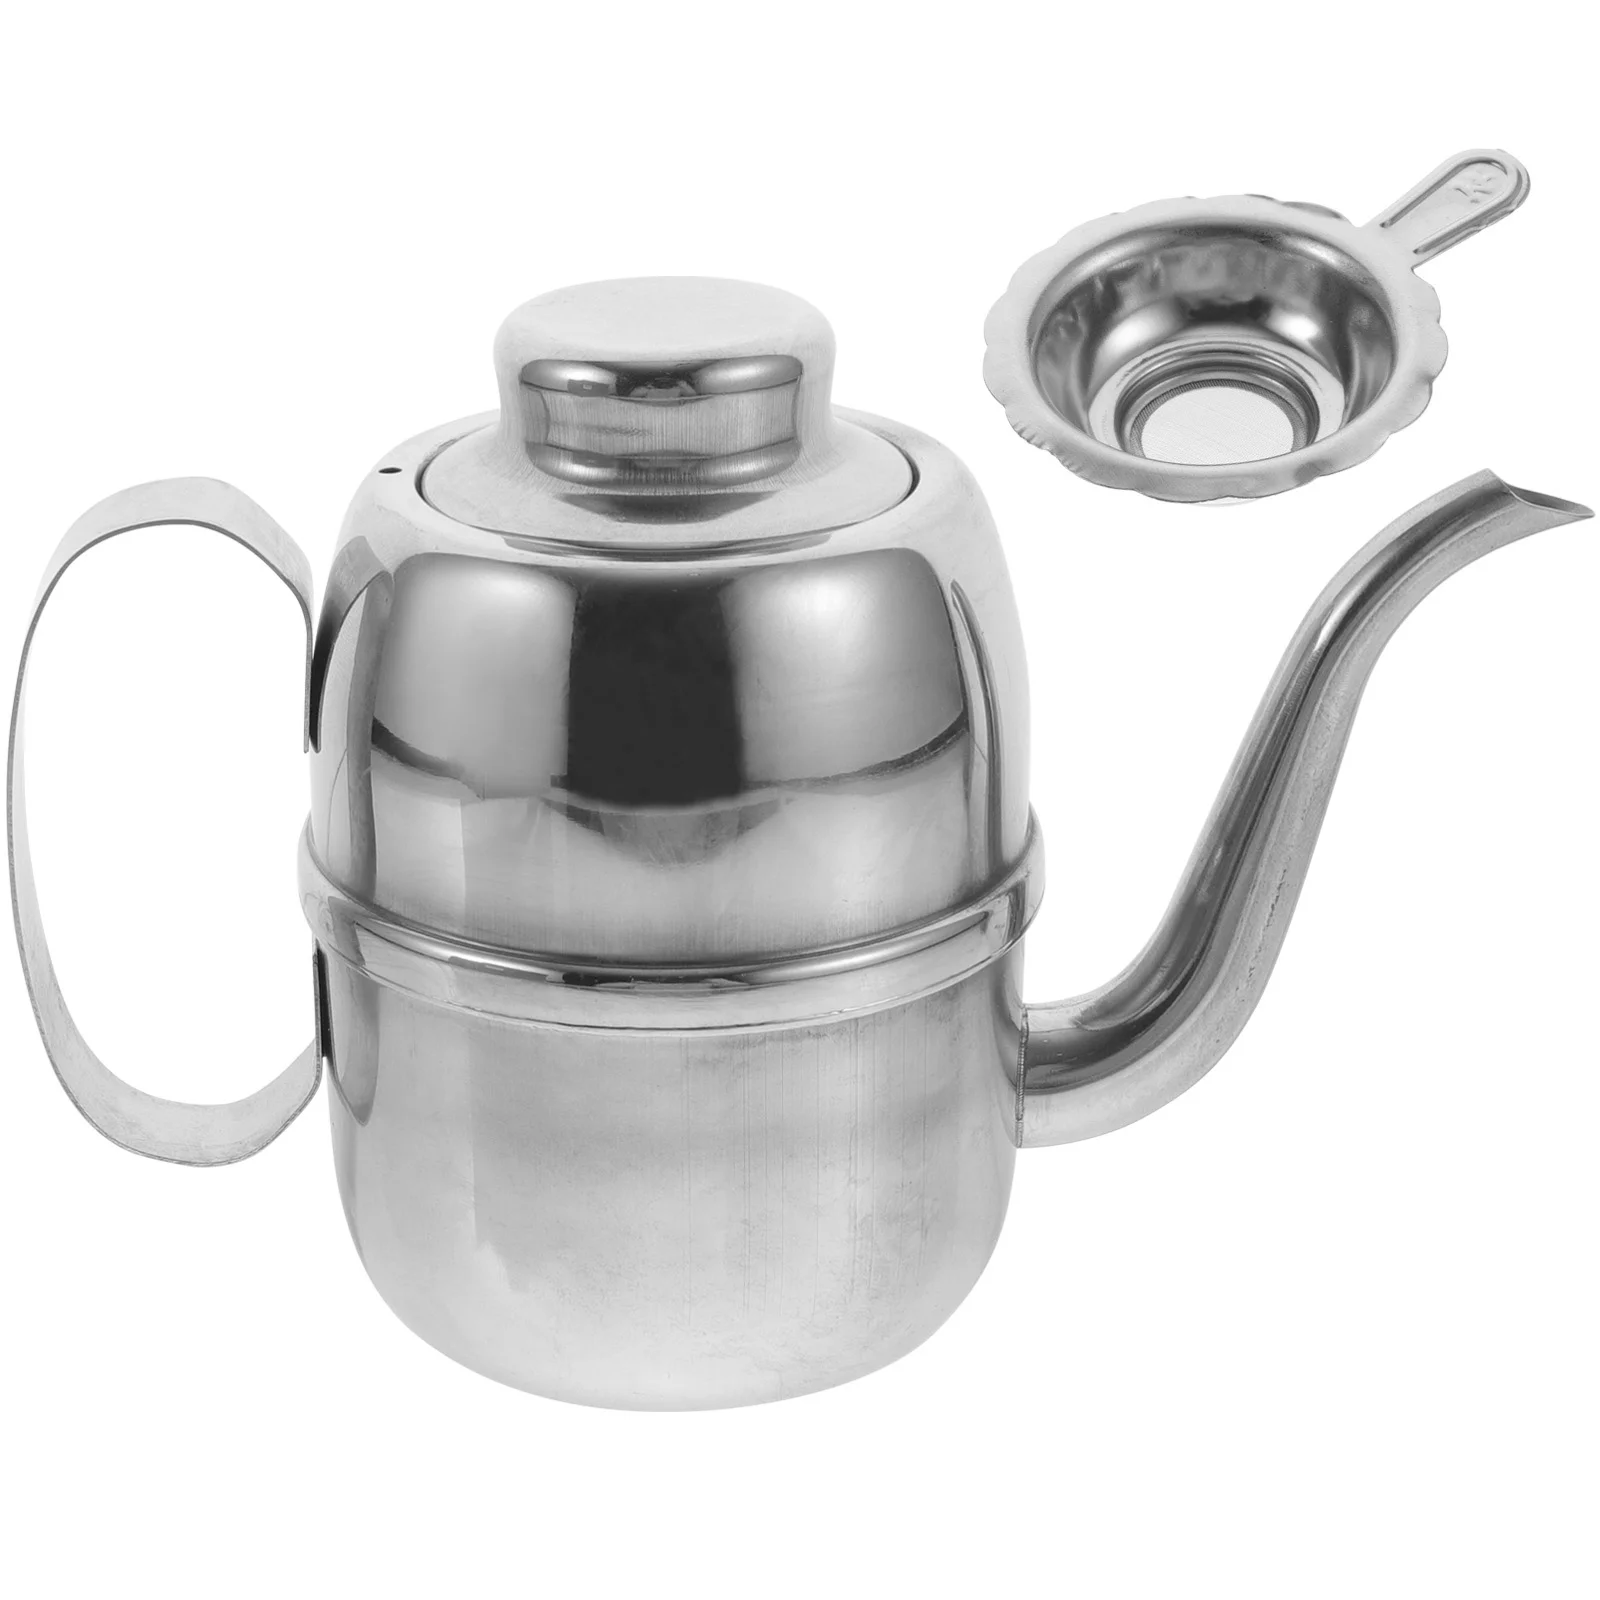 

Stainless Steel Oil Pot Kitchen Canister Grease Filtering Cup Convenient Holder Strainer Container